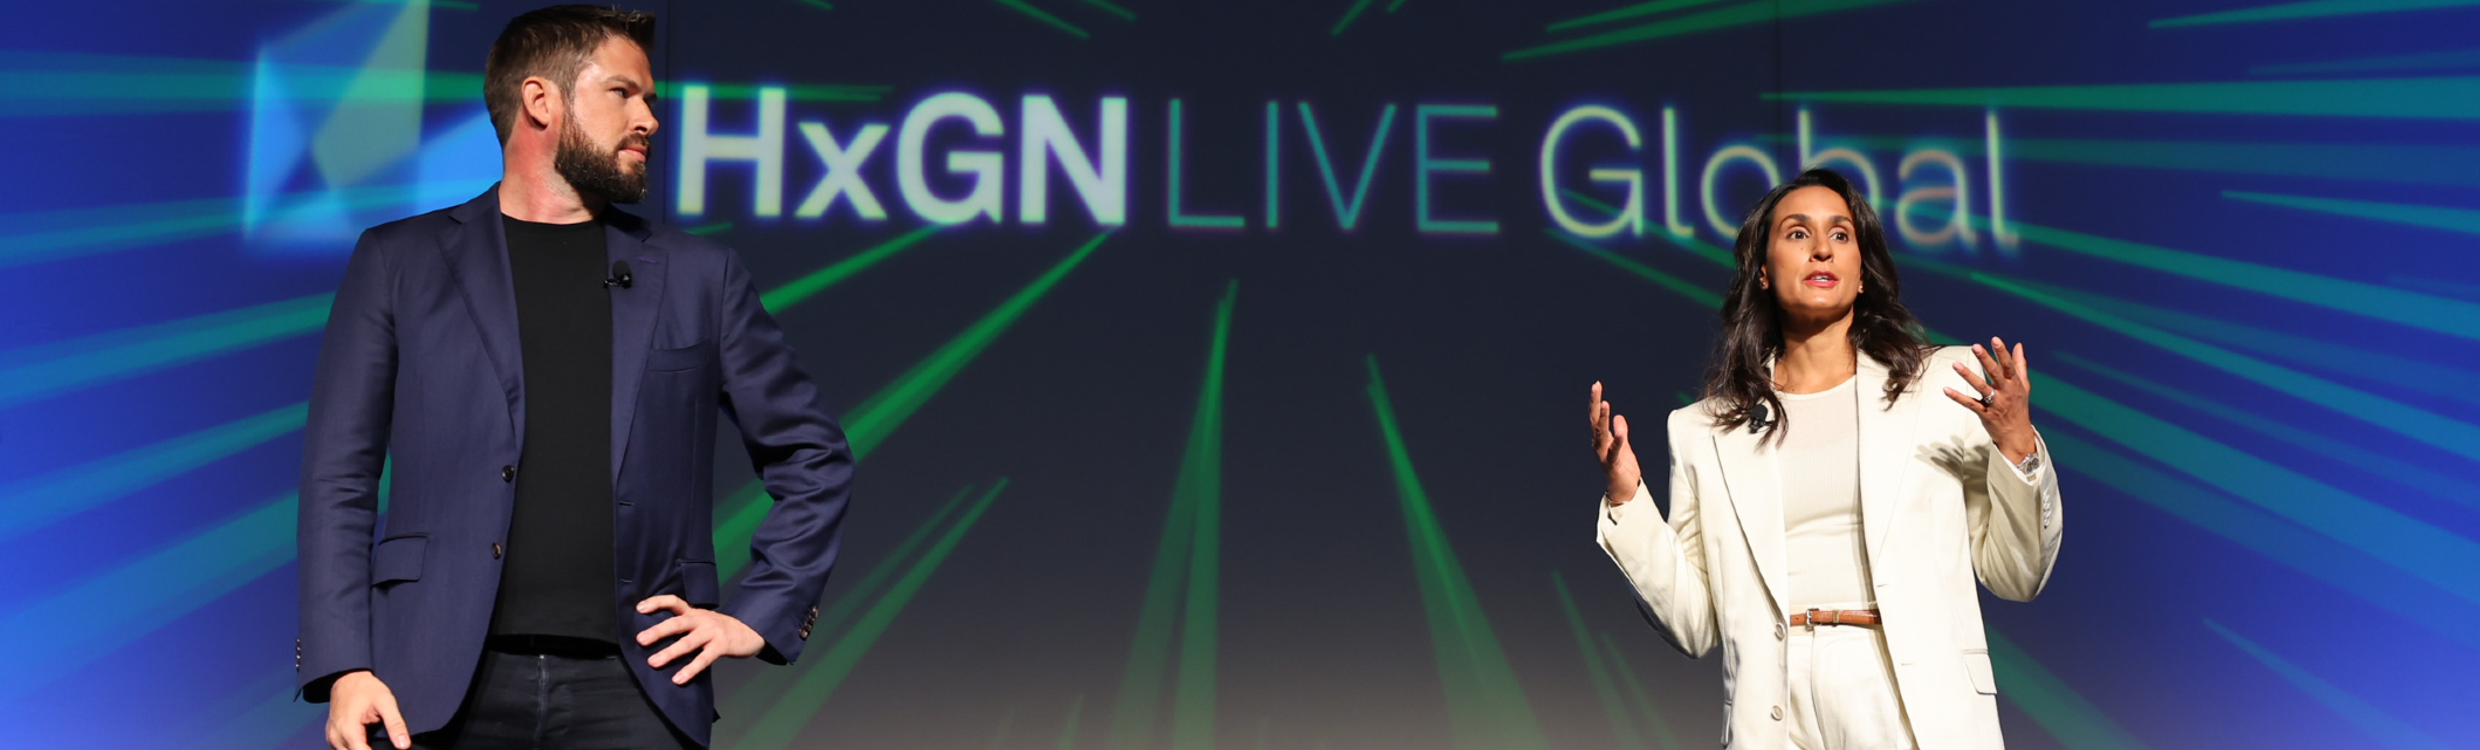 Keynote presenters speaking at HxGN LIVE Global 2023 in front of a blue and green banner.